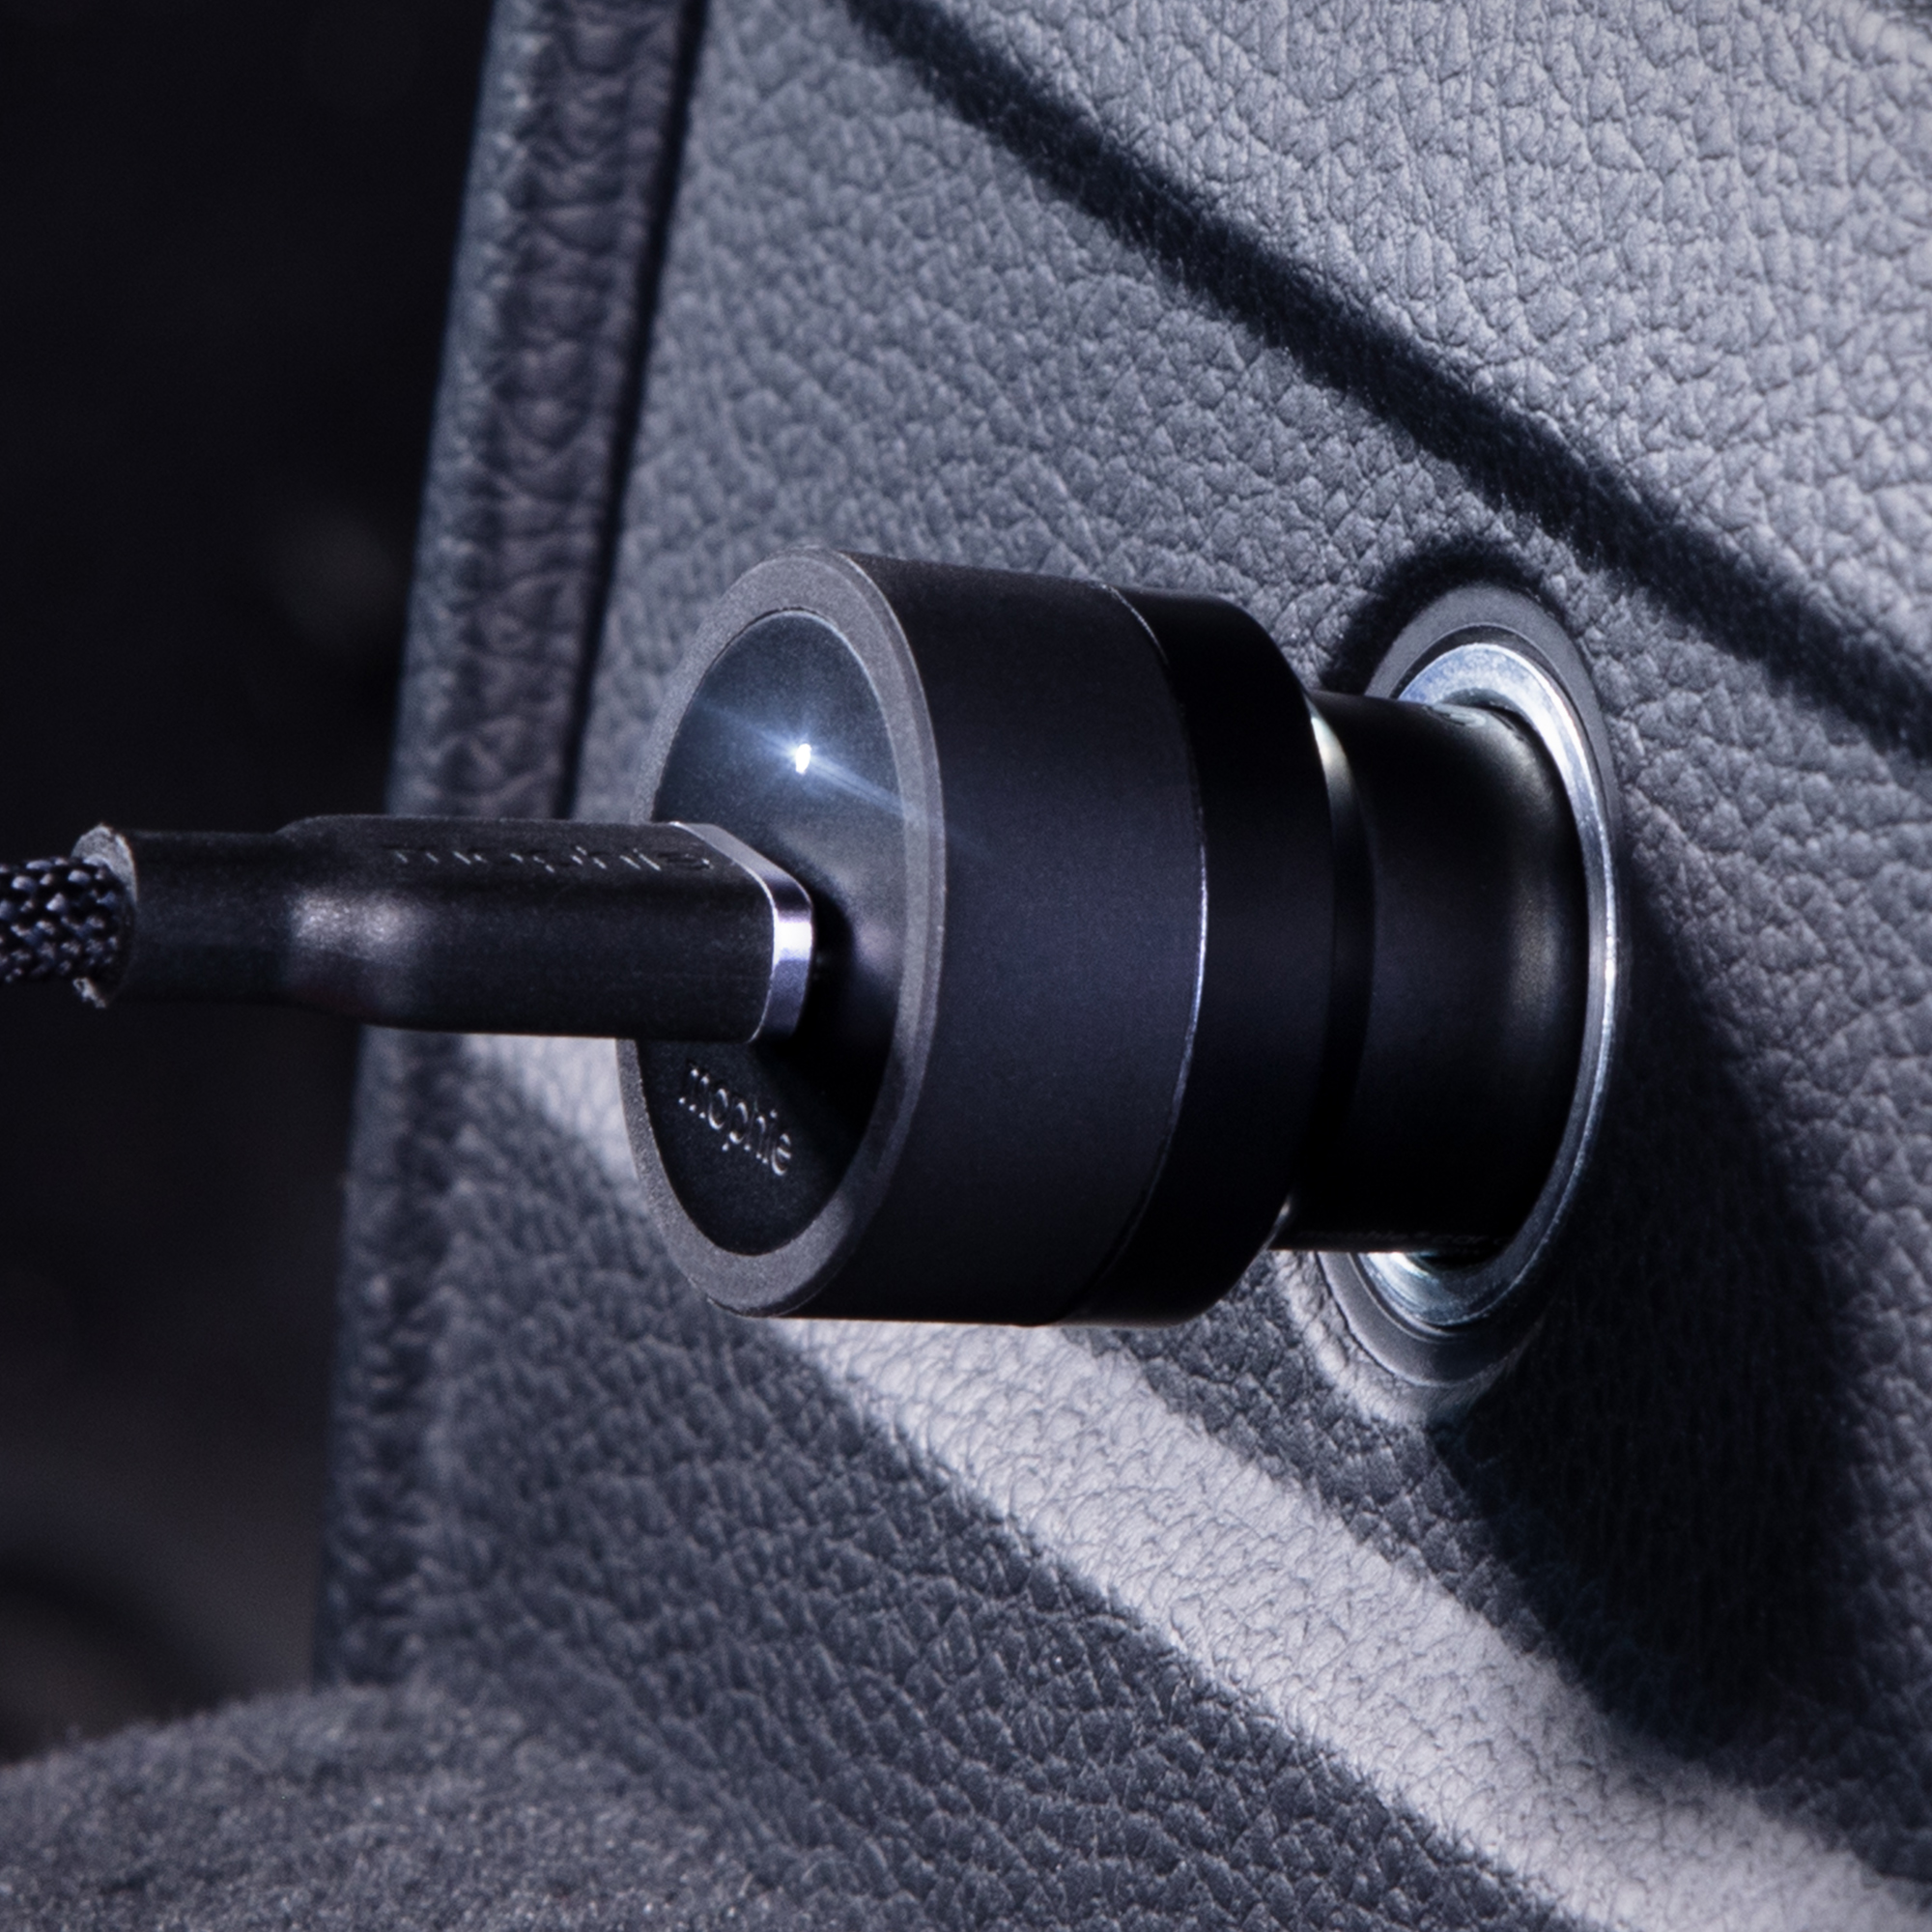 Universal Vehicle Compatibility||
The 30W USB-C car charger plugs into any vehicle’s auxiliary port.